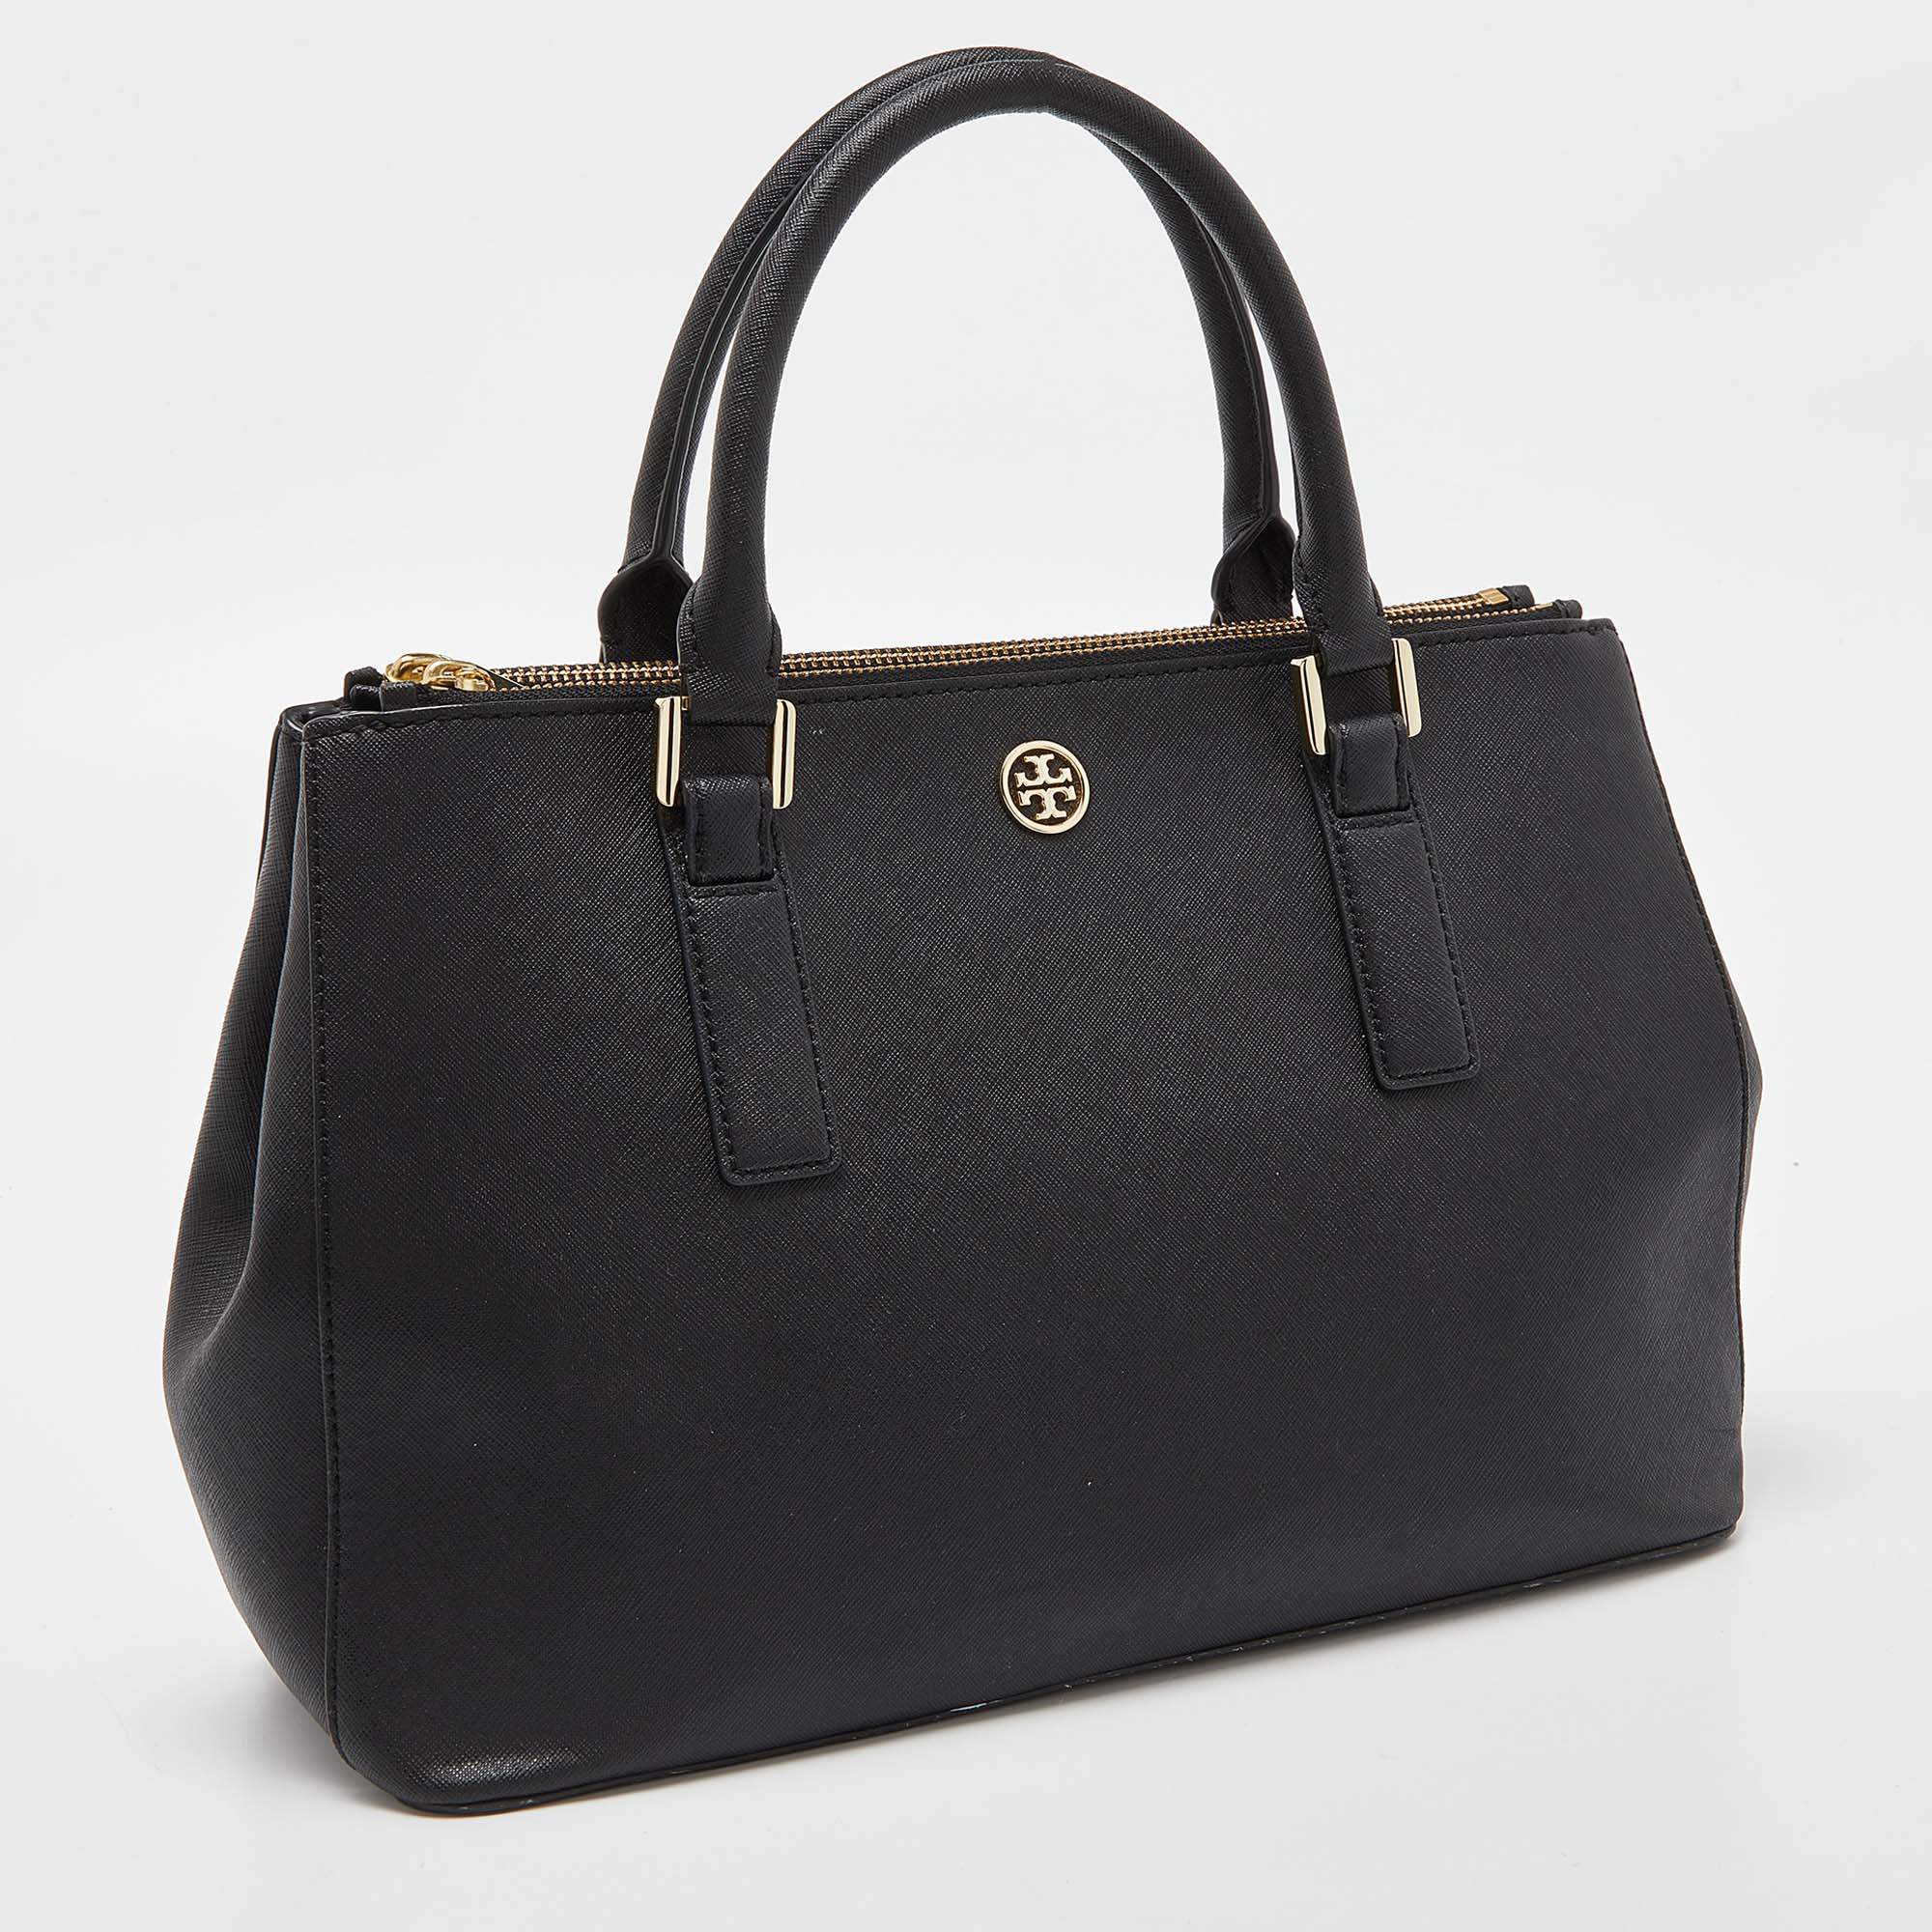 Tory Burch Robinson Double-Zip Saffiano Tote Bag, Black with Gold Hardware